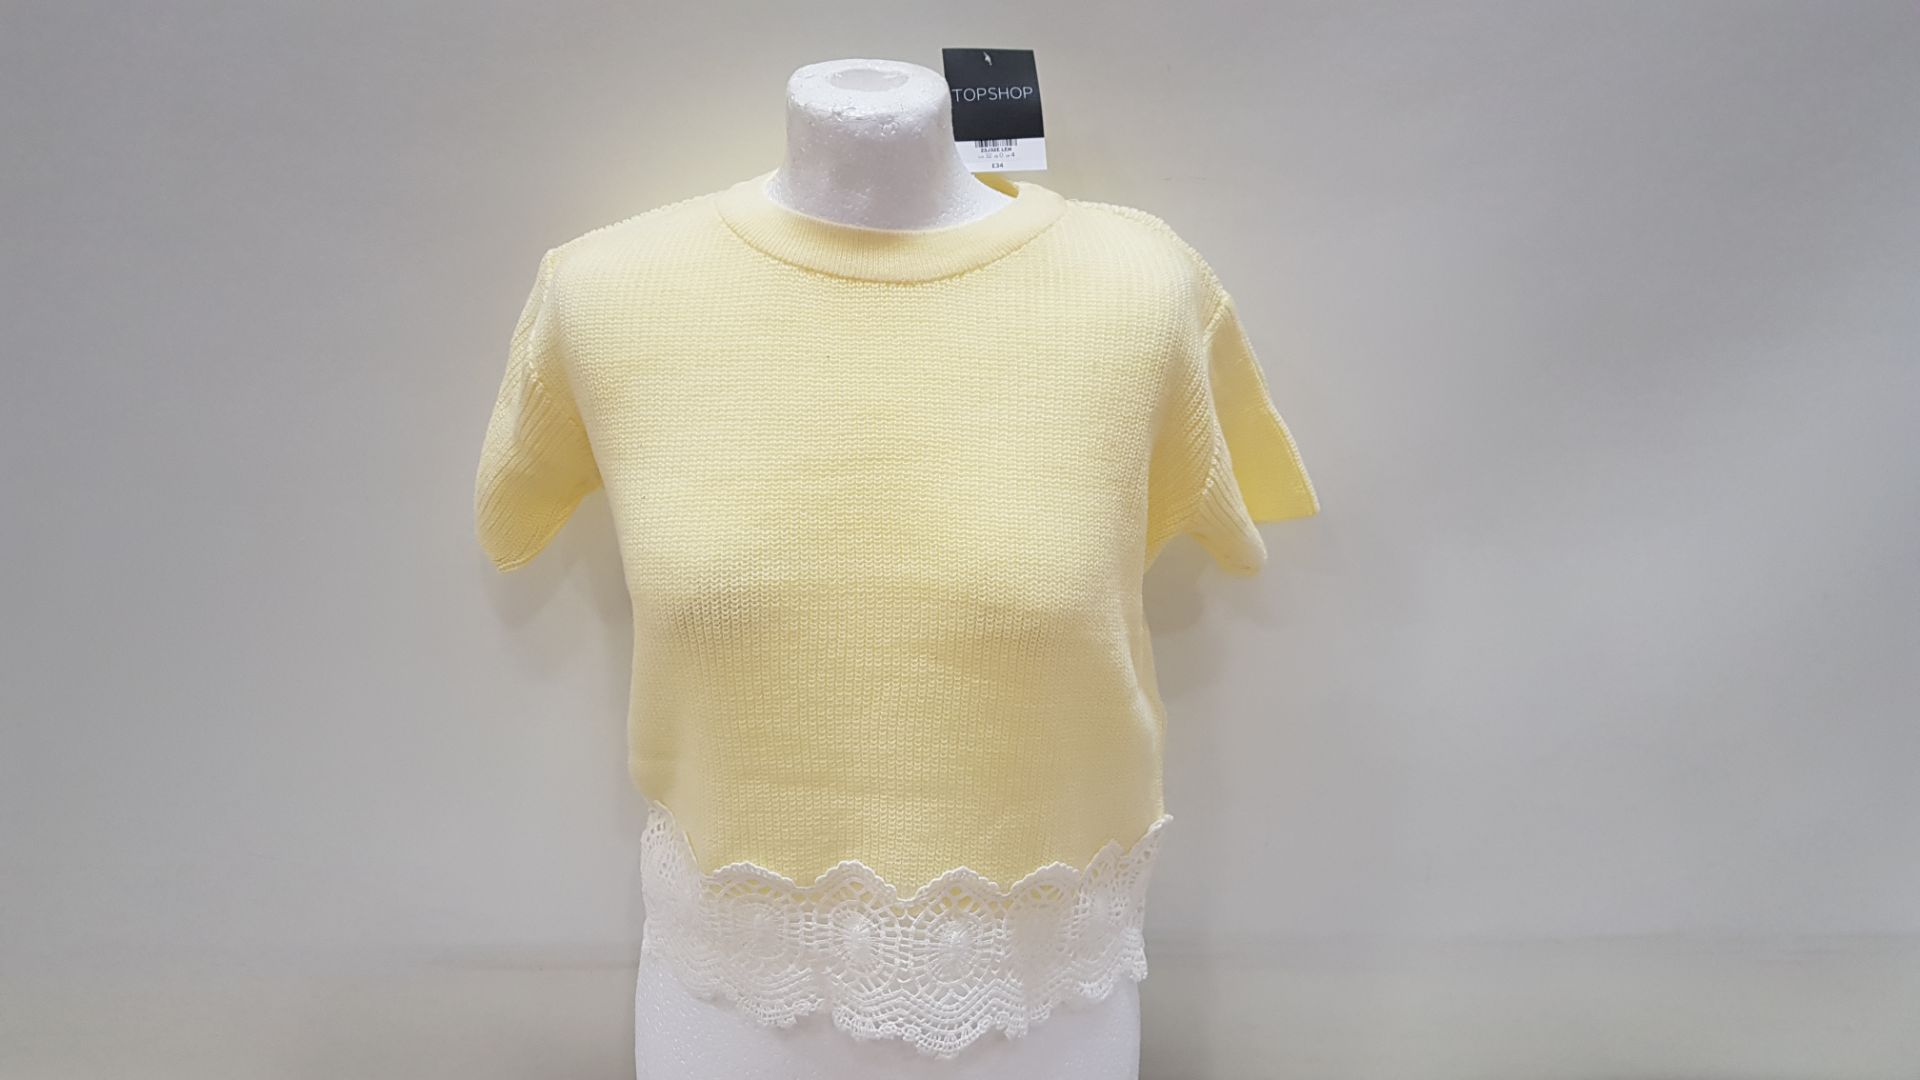 20 X BRAND NEW TOPSHOP YELLOW KNITTED T SHIRT SIZE 4 RRP £34.00 (TOTAL RRP £680.00)